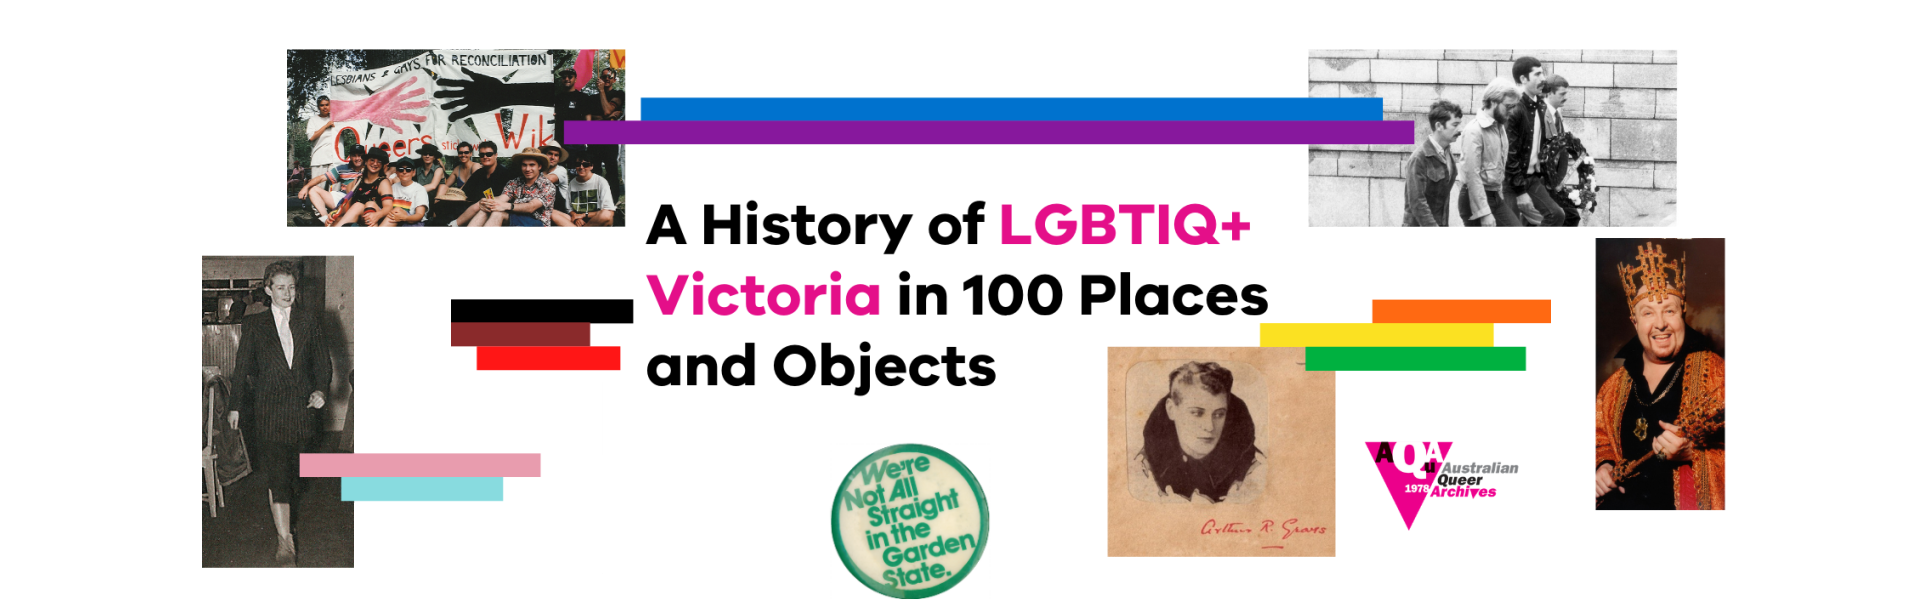 A History of LGBTIQ+ Victoria in 100 Places and Objects – Banner